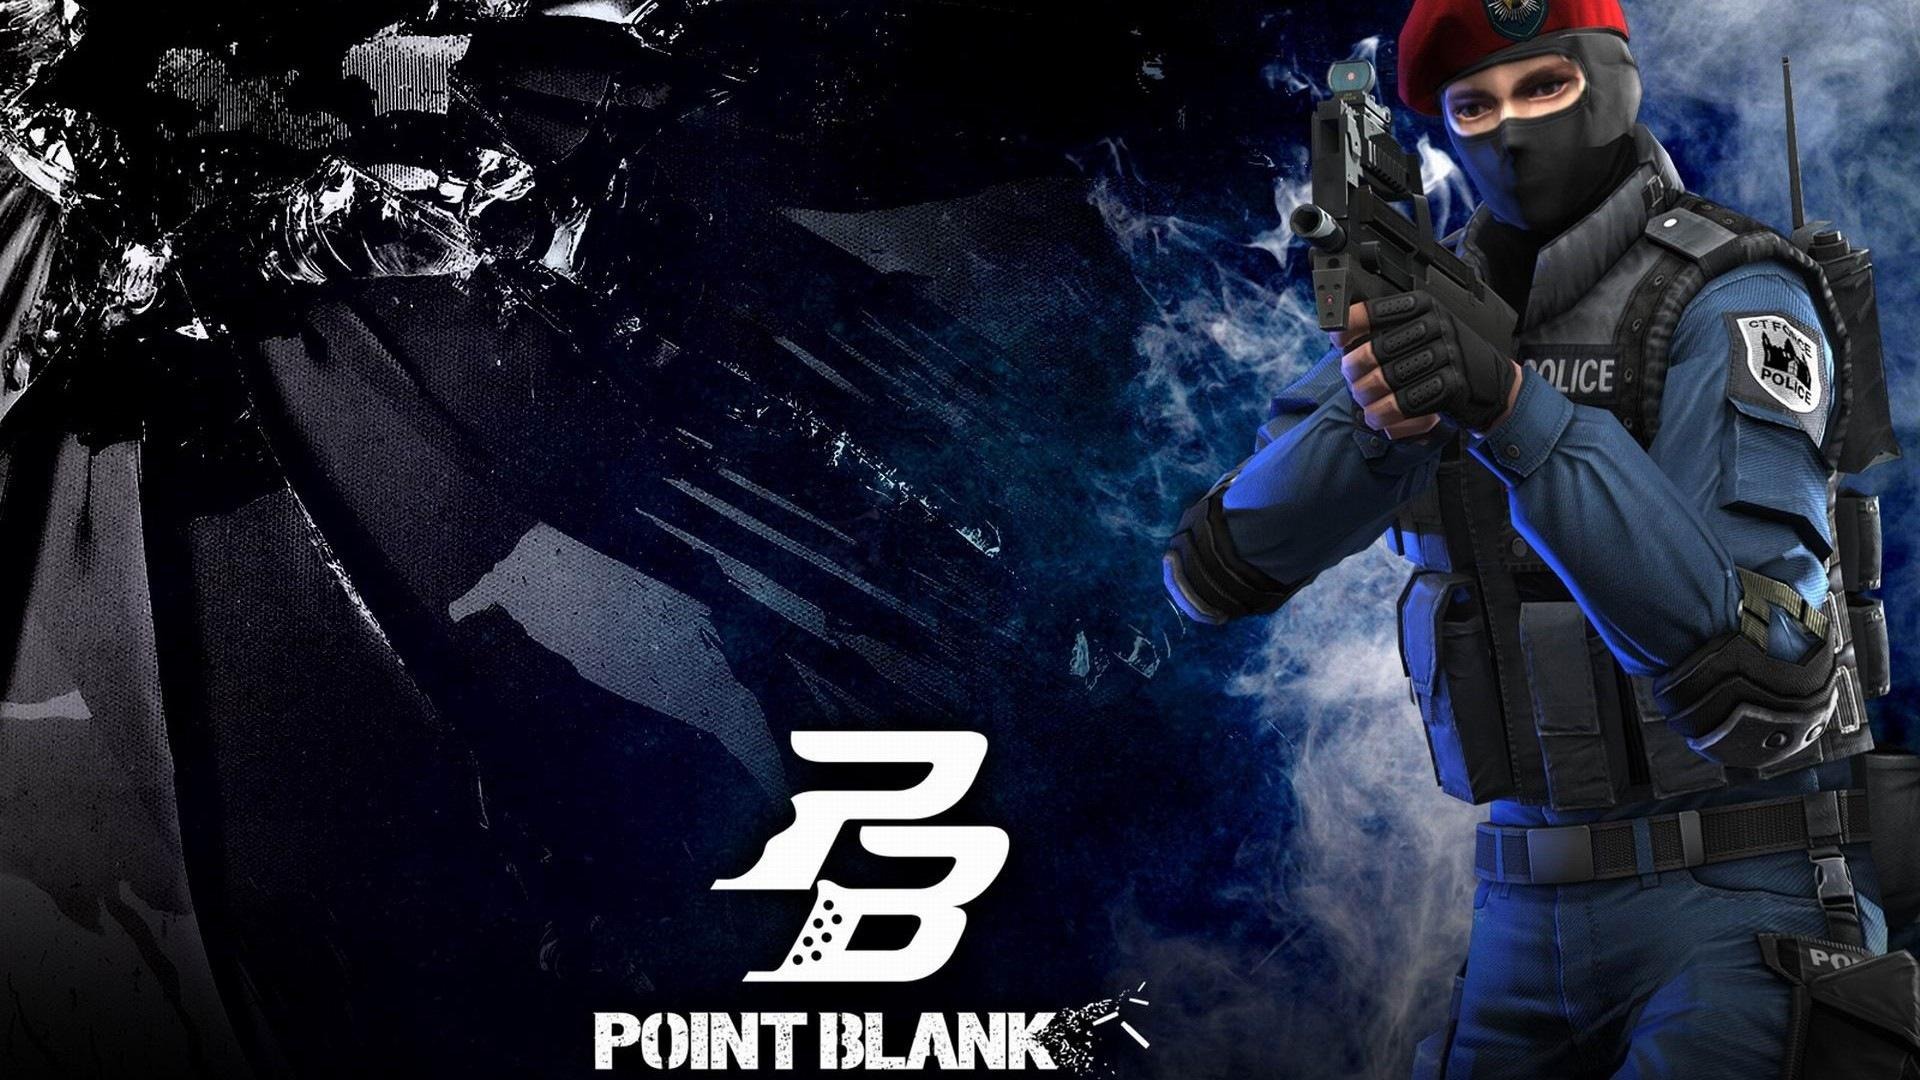 point blank, video game 2160p